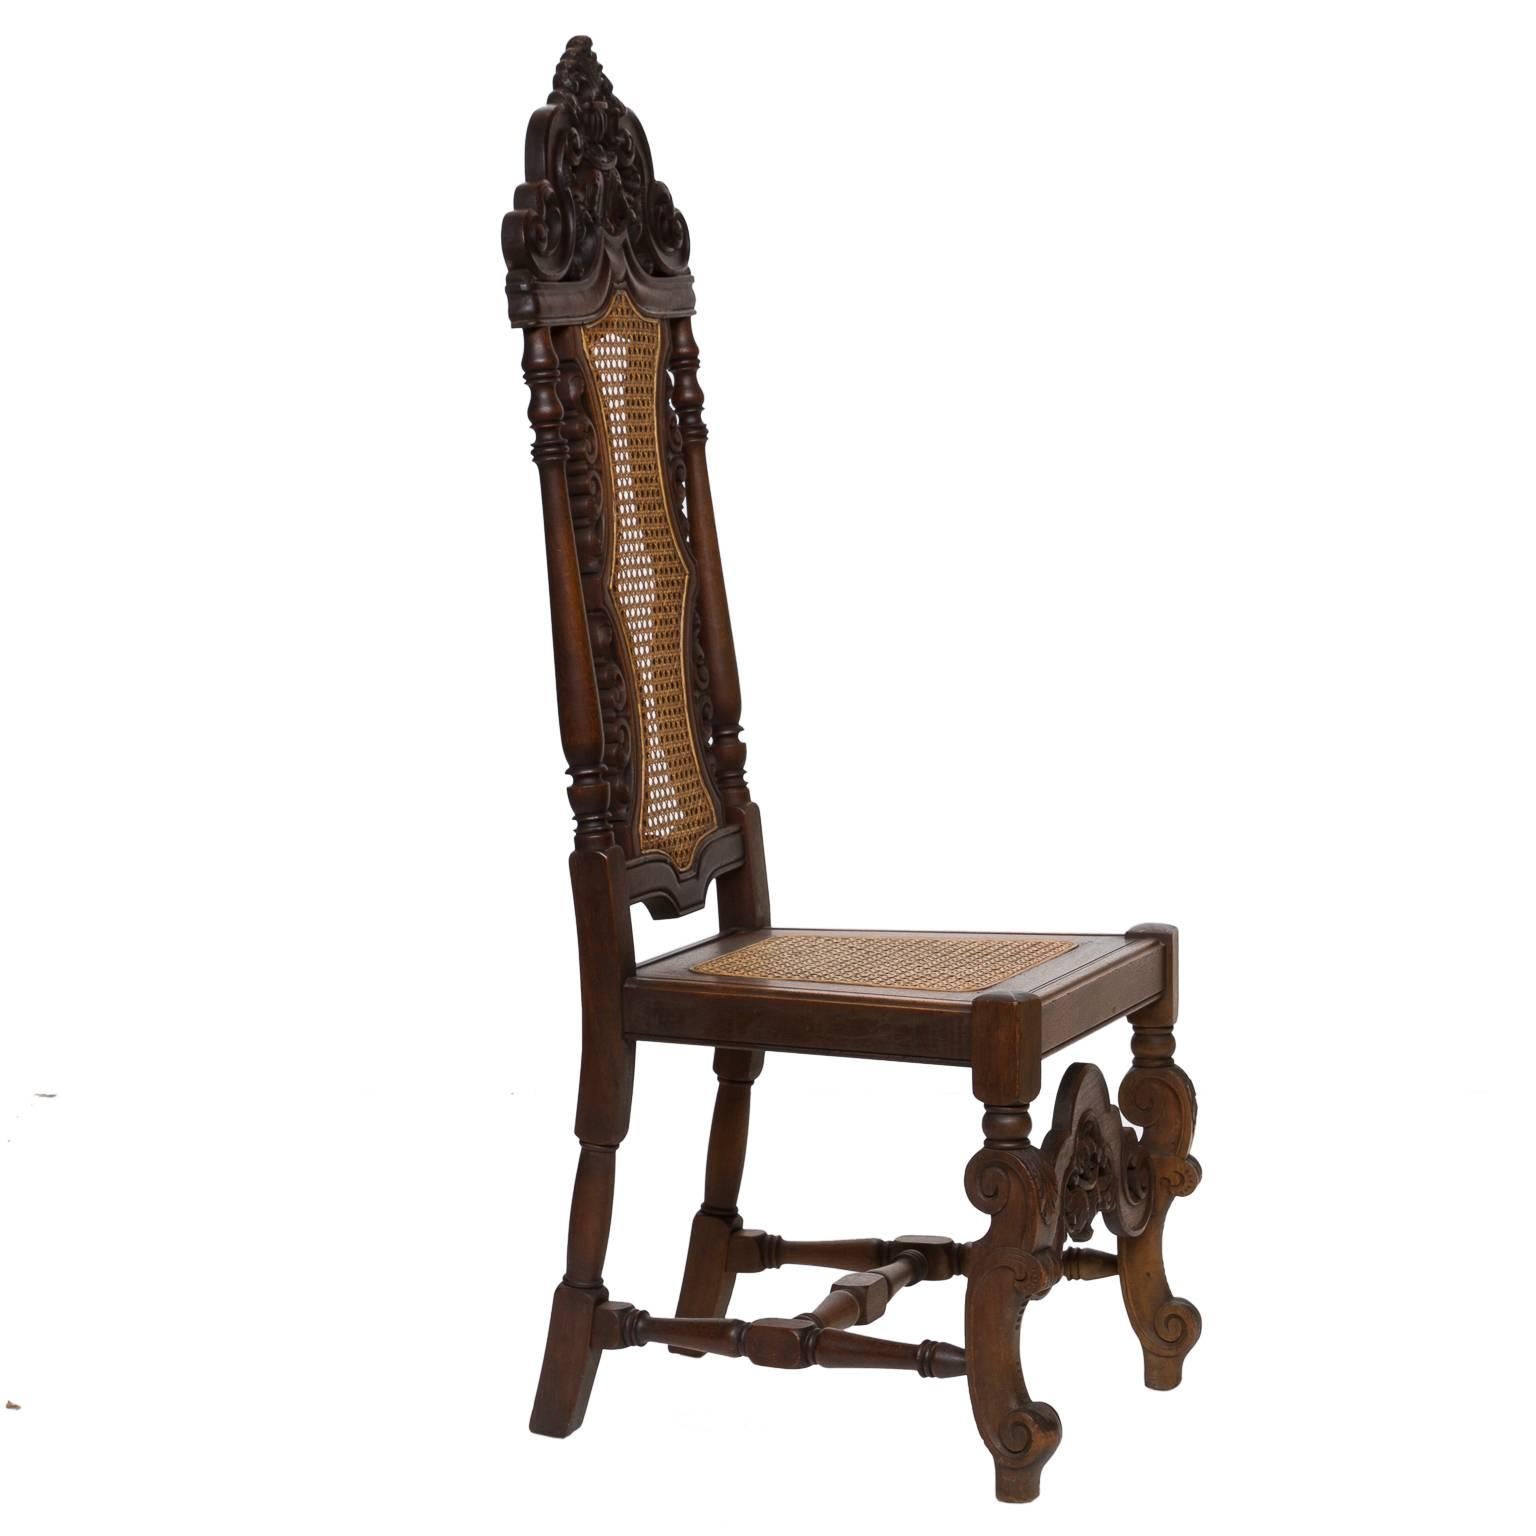 Renaissance Revival 19th Century Carved Walnut Side Chair with Cane